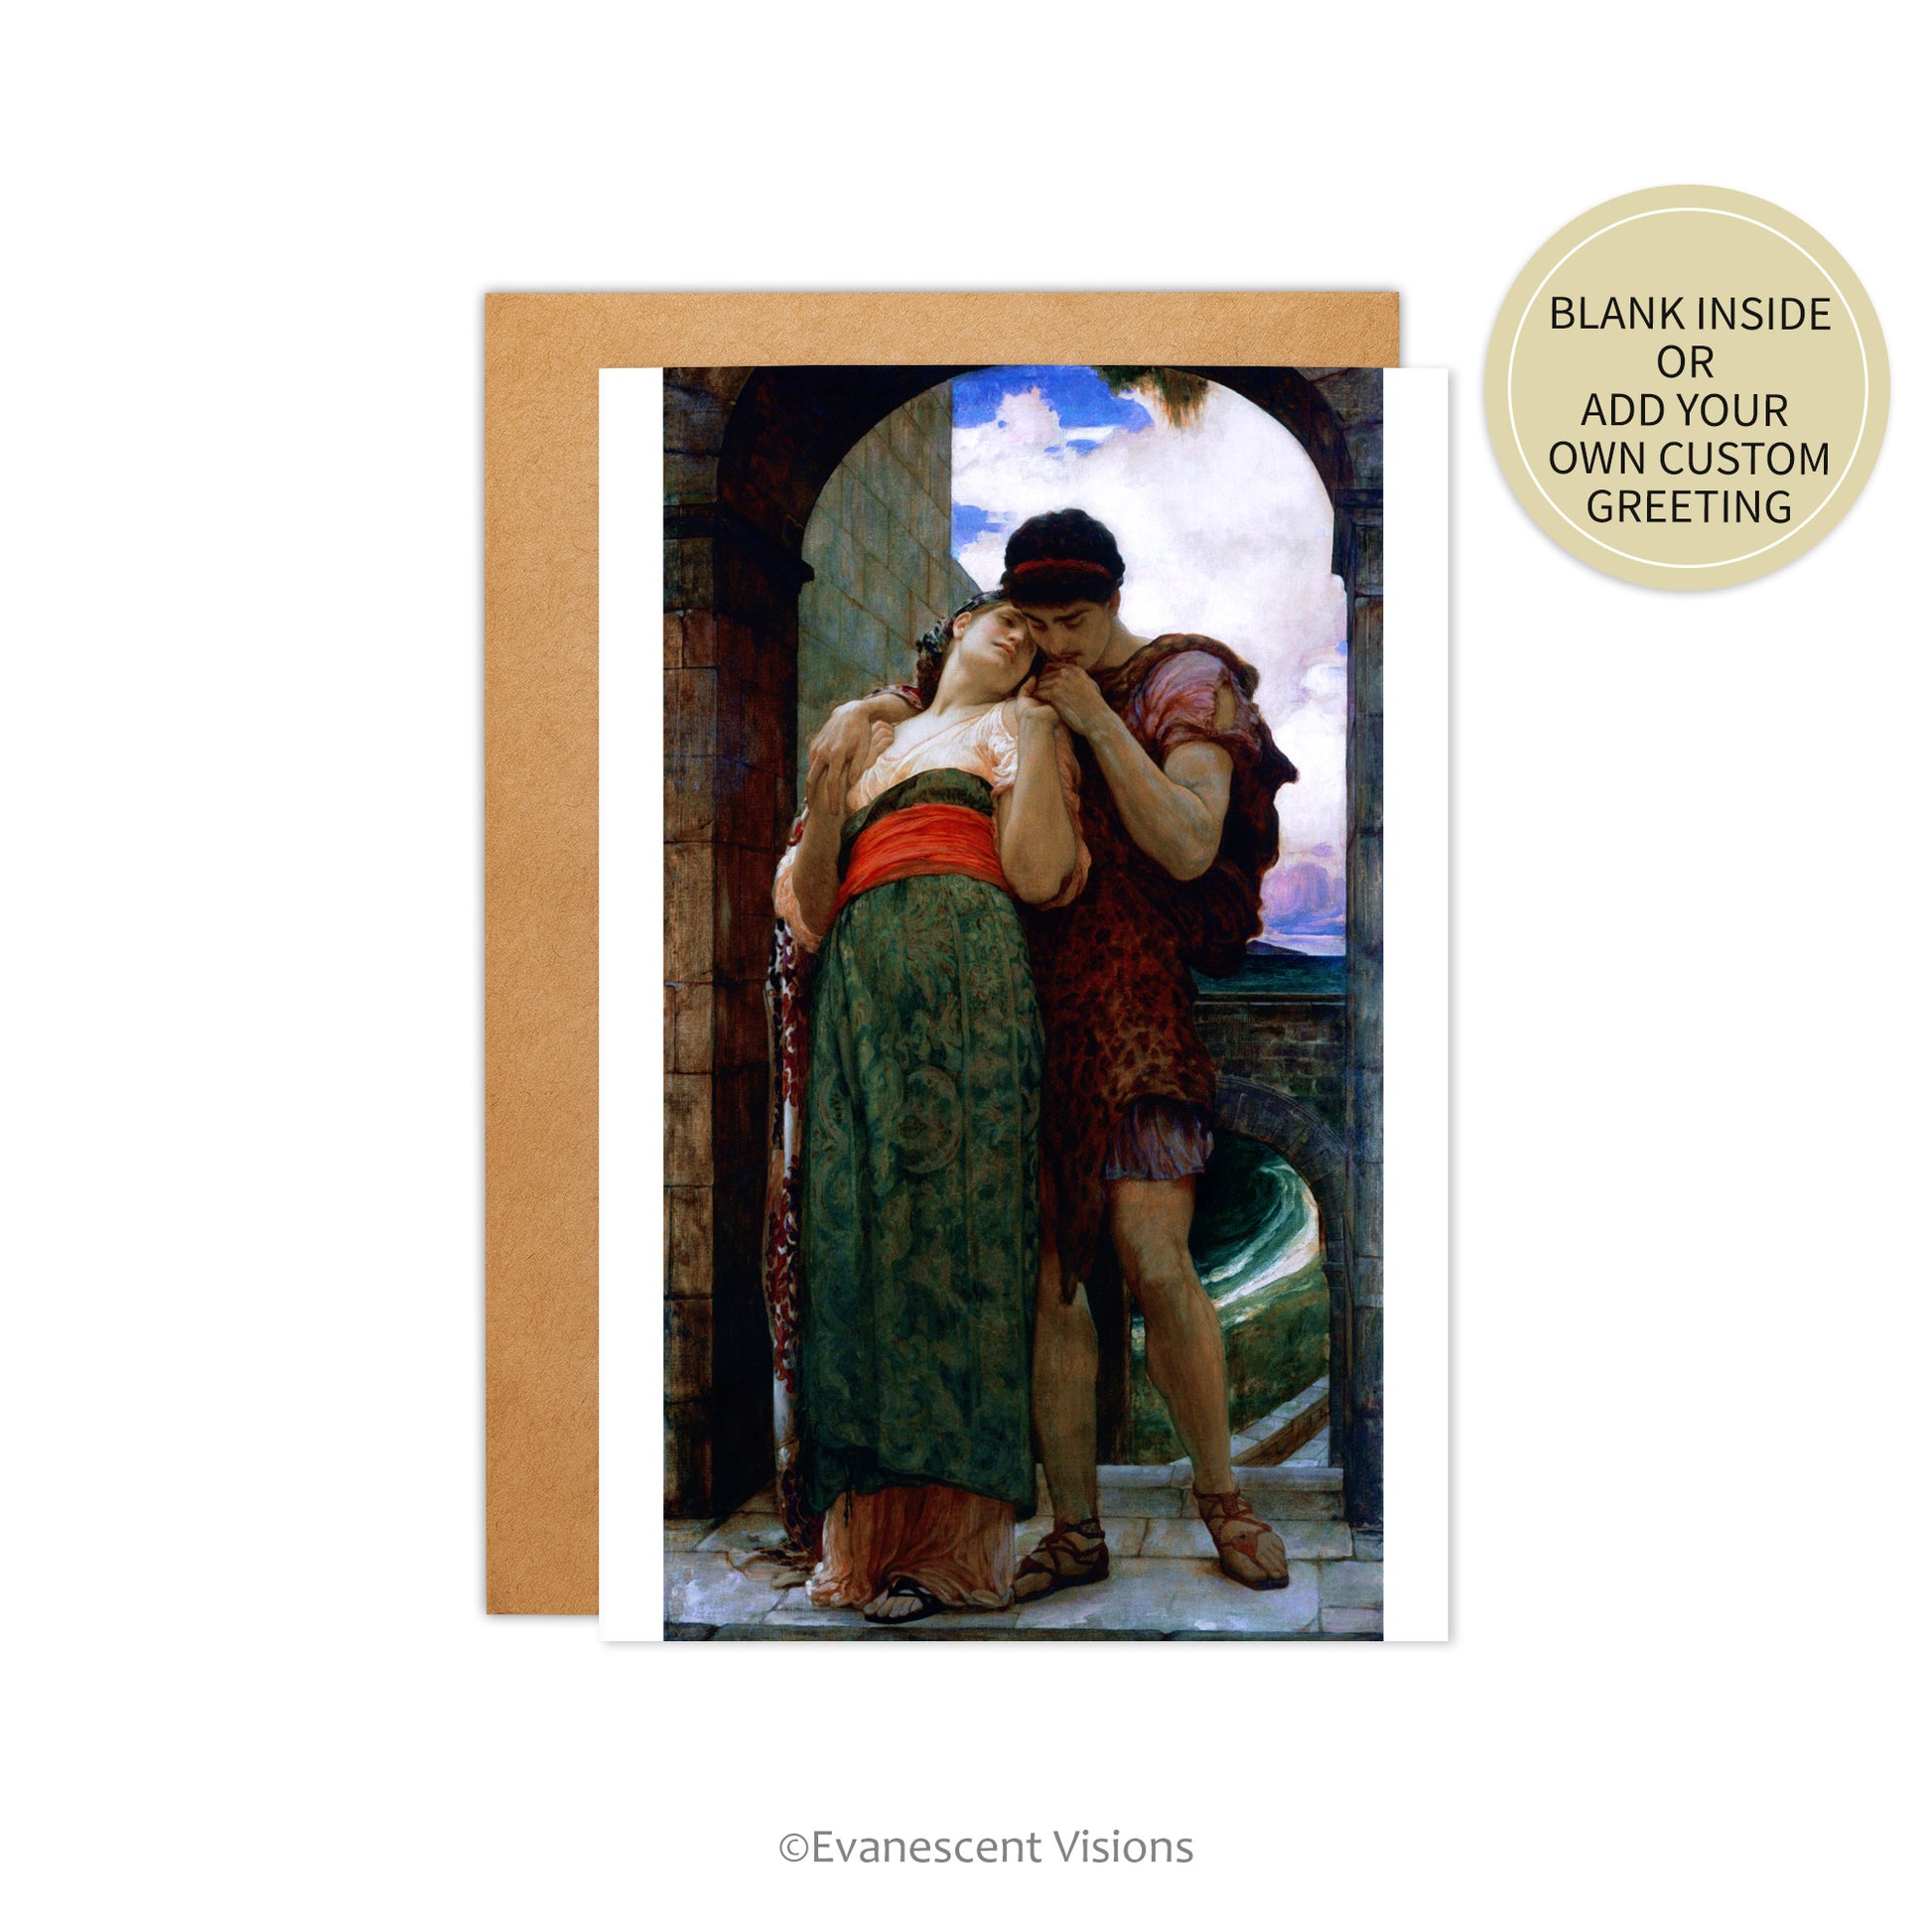 Personalised Anniversary Card with envelope featuring Frederic Leighton's artwork called 'Wedded' 